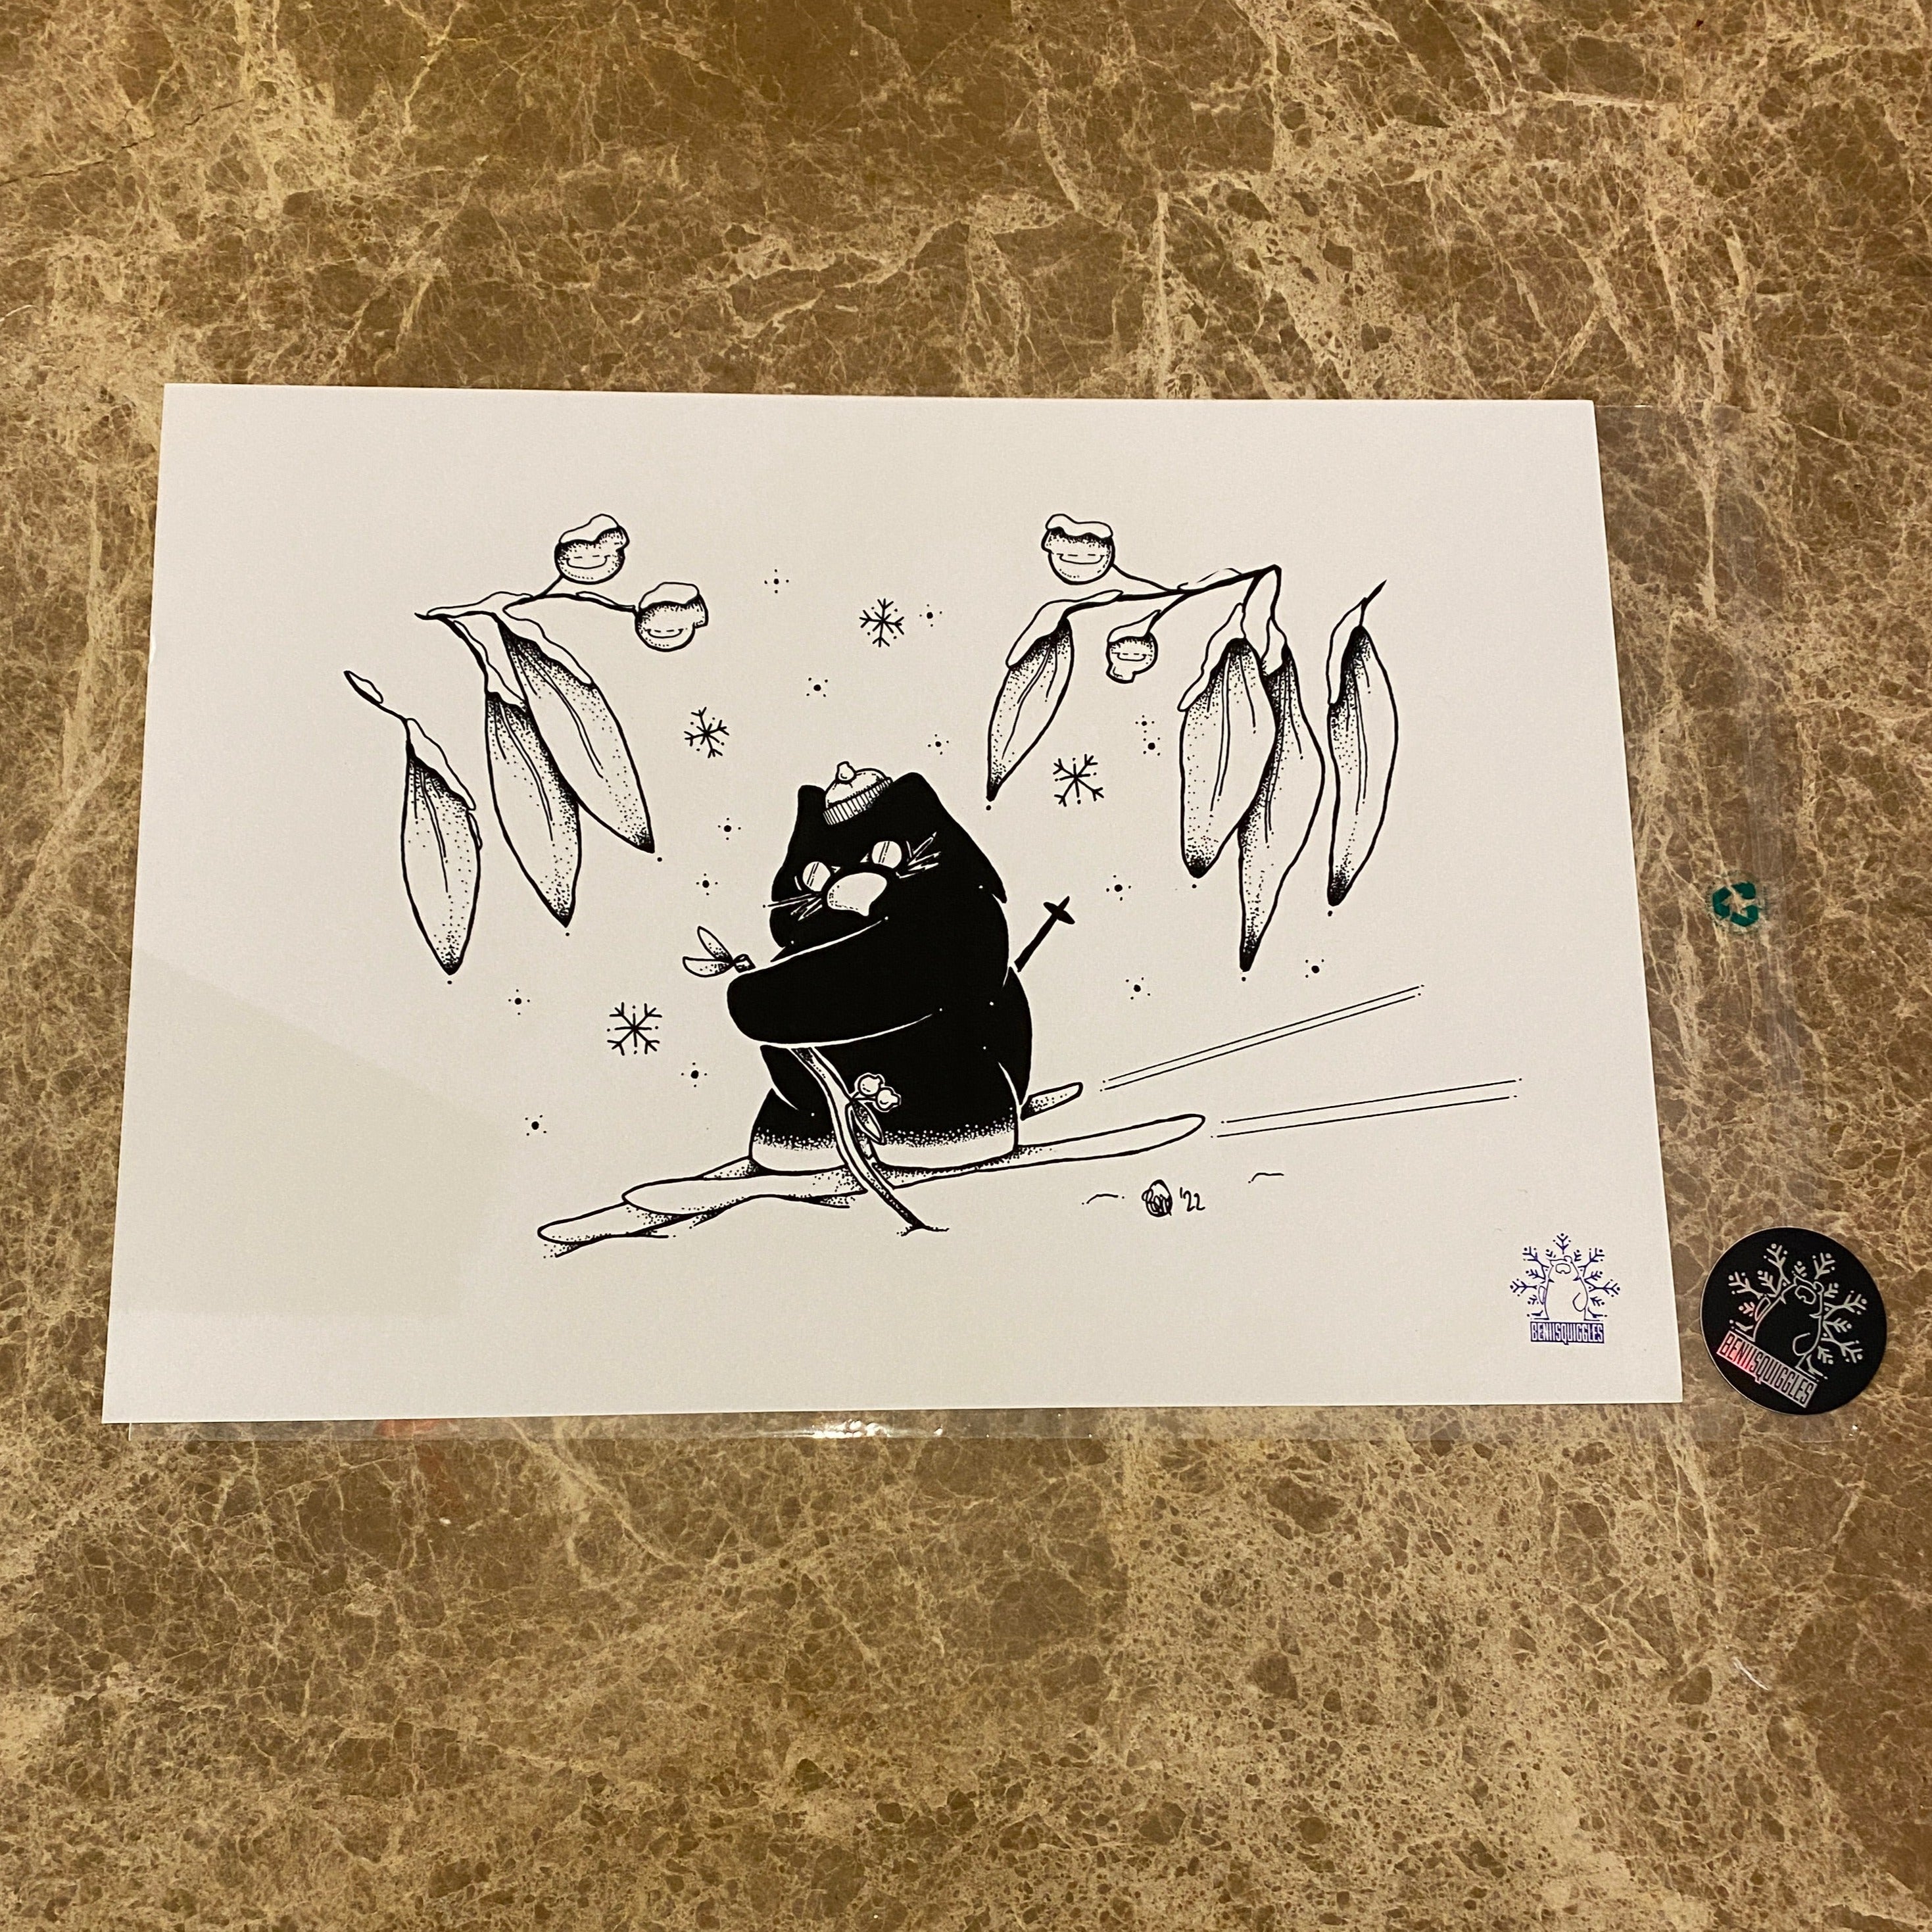 Agent W the skiing wombat amongst snowgums Art Print, outside of protective plastic envelope.